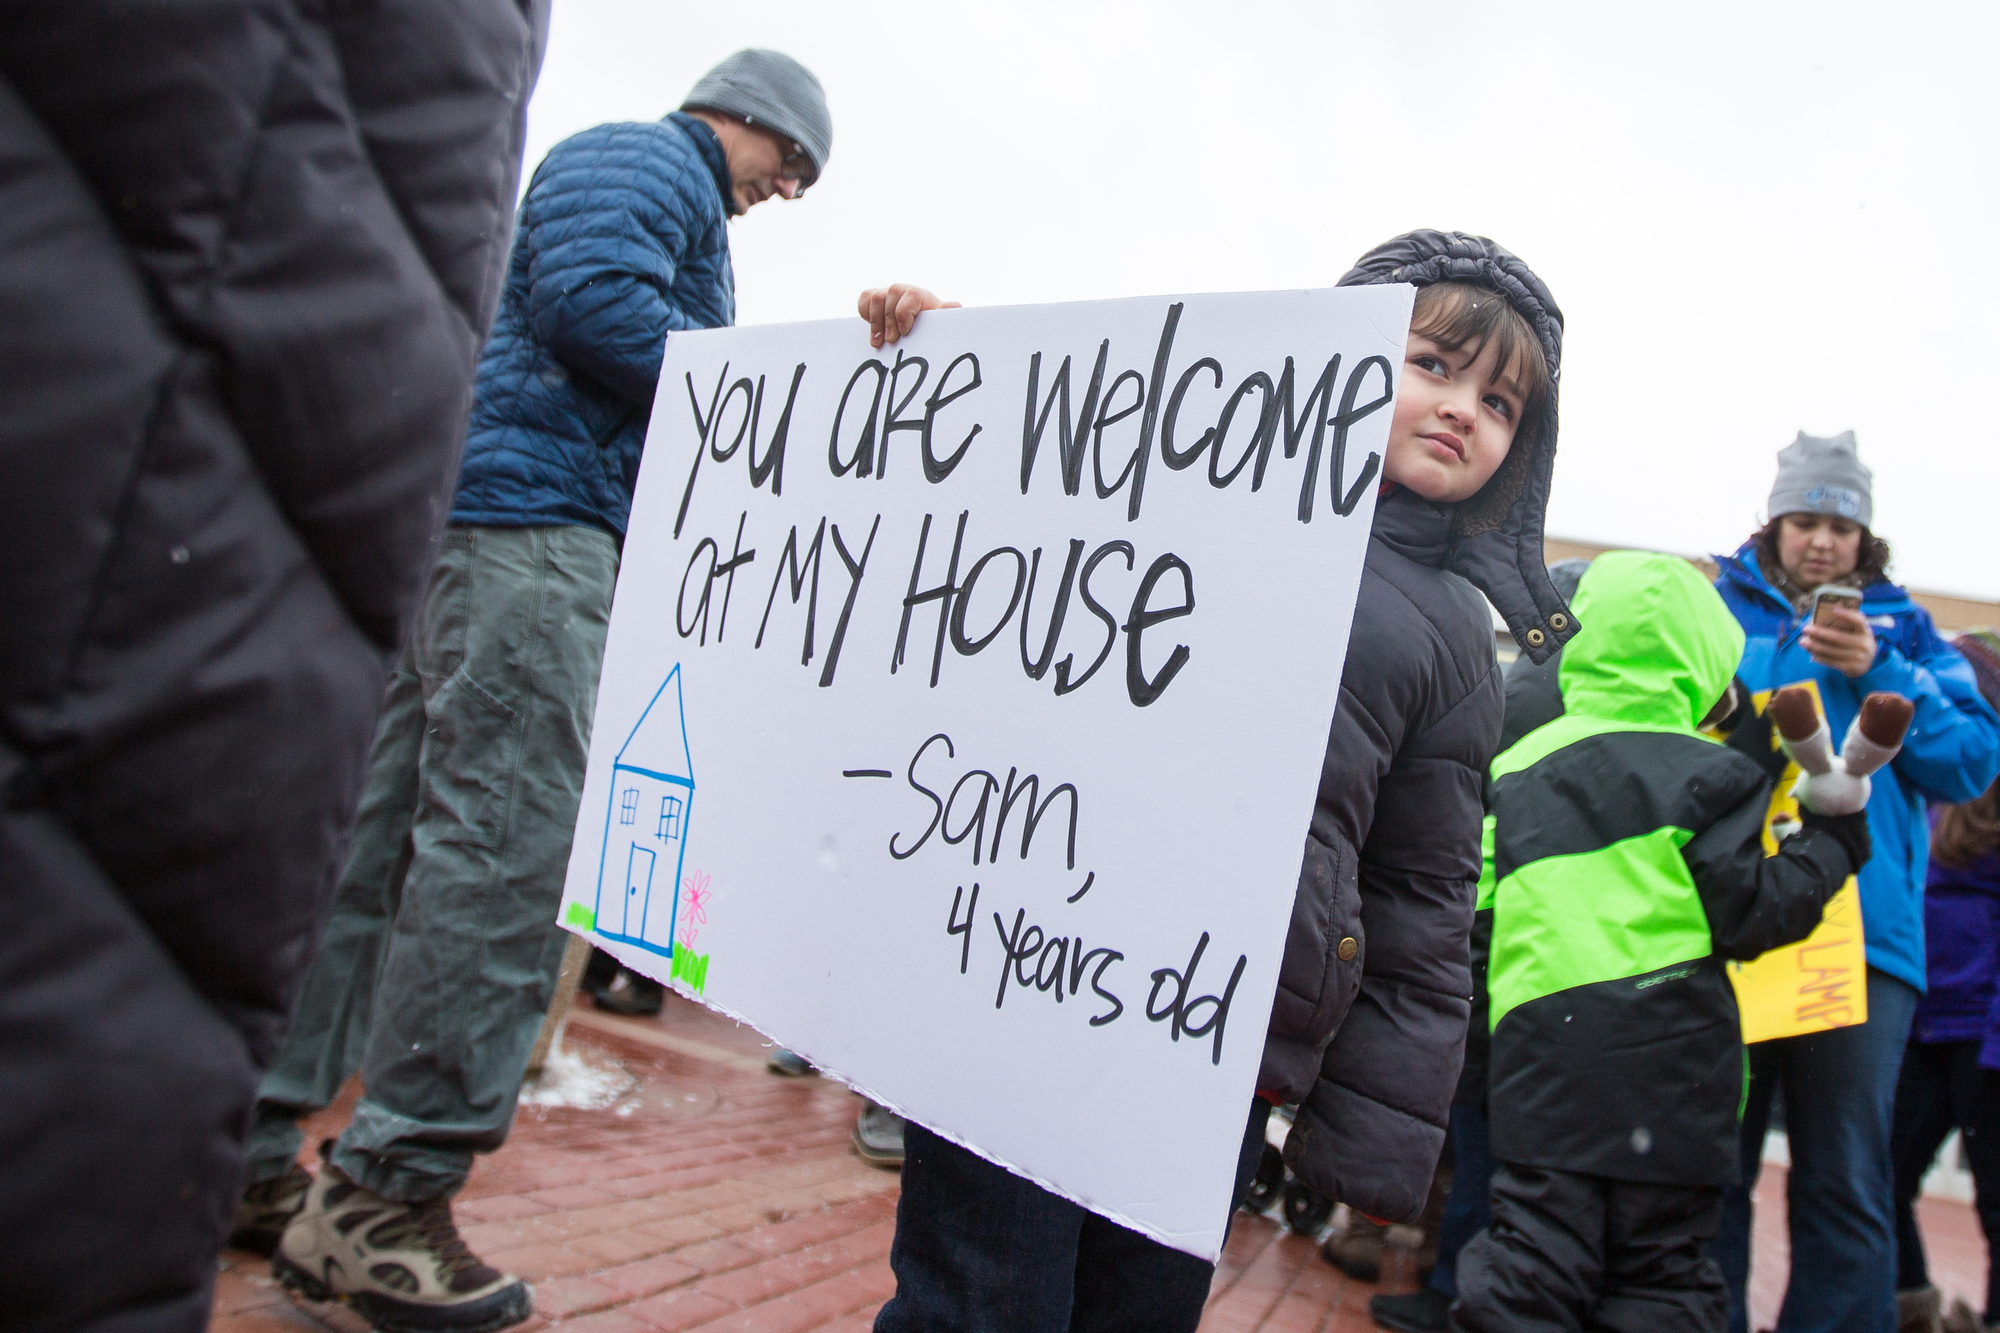  Sam Sussman, 4, holds a sign while attending an anti-immigration protest outside of the Federal Building in downtown Ann Arbor on Sunday, January 29, 2017. About 100 people attended the protest. Matt Weigand | The Ann Arbor News 